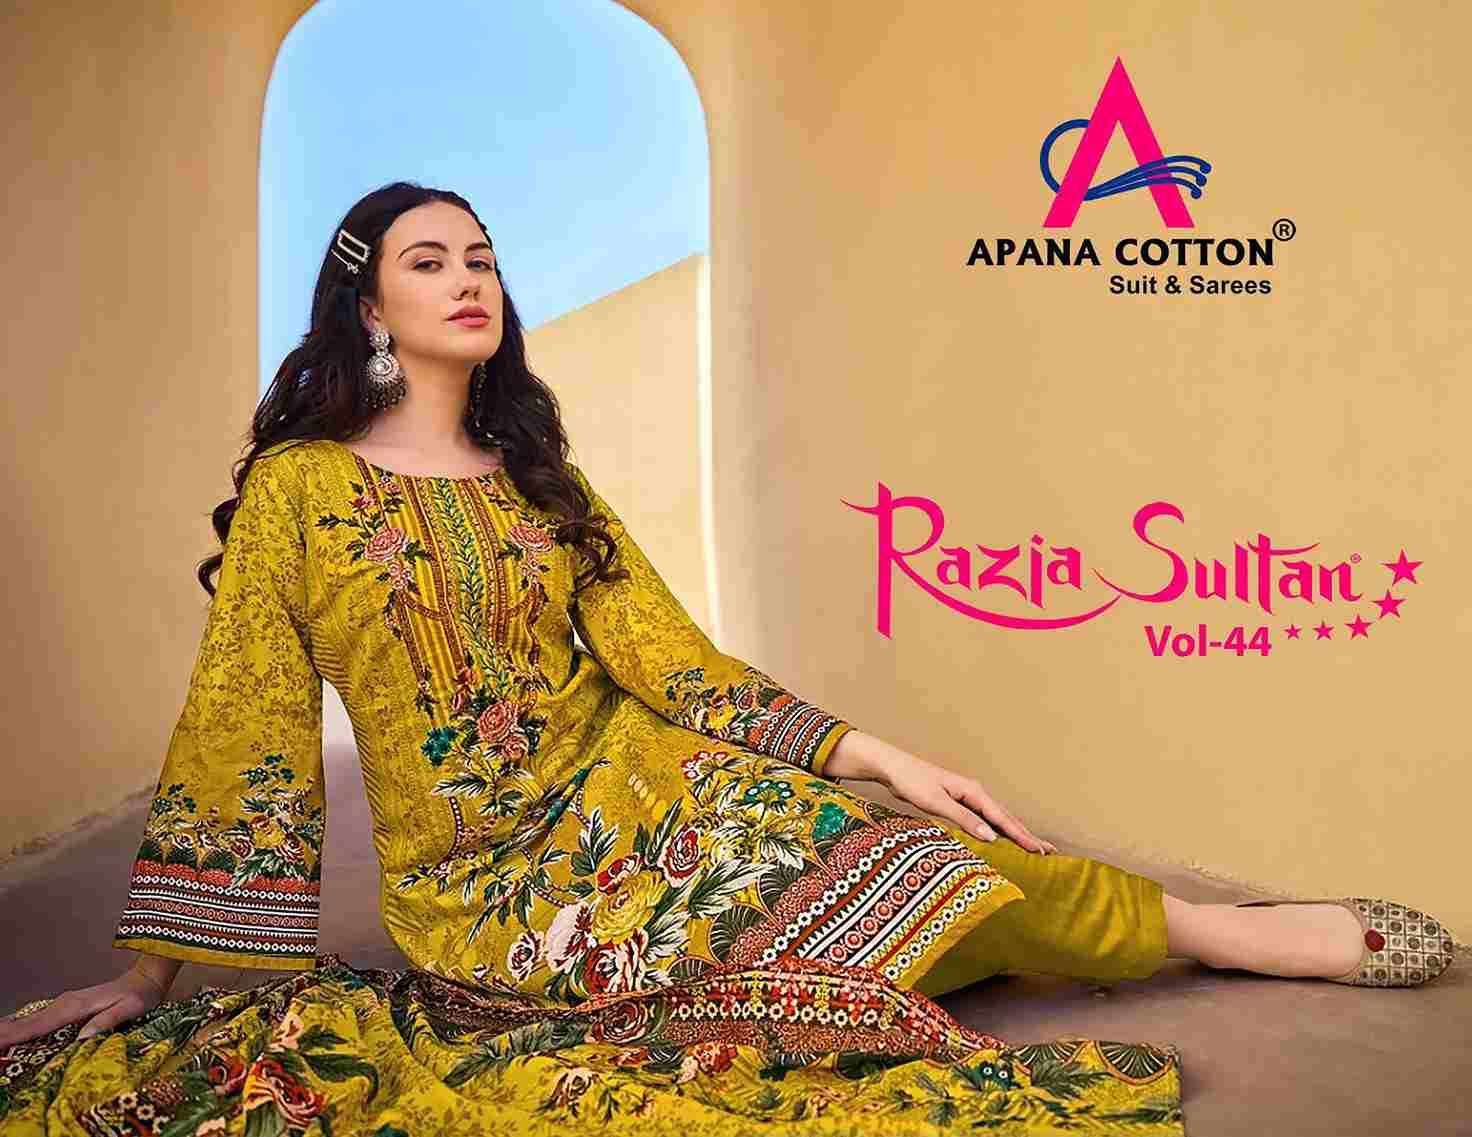 Razia Sultan Vol-44 By Apana Cotton 44001 To 44008 Series Beautiful Festive Suits Colorful Stylish Fancy Casual Wear & Ethnic Wear Pure Cotton Print Dresses At Wholesale Price